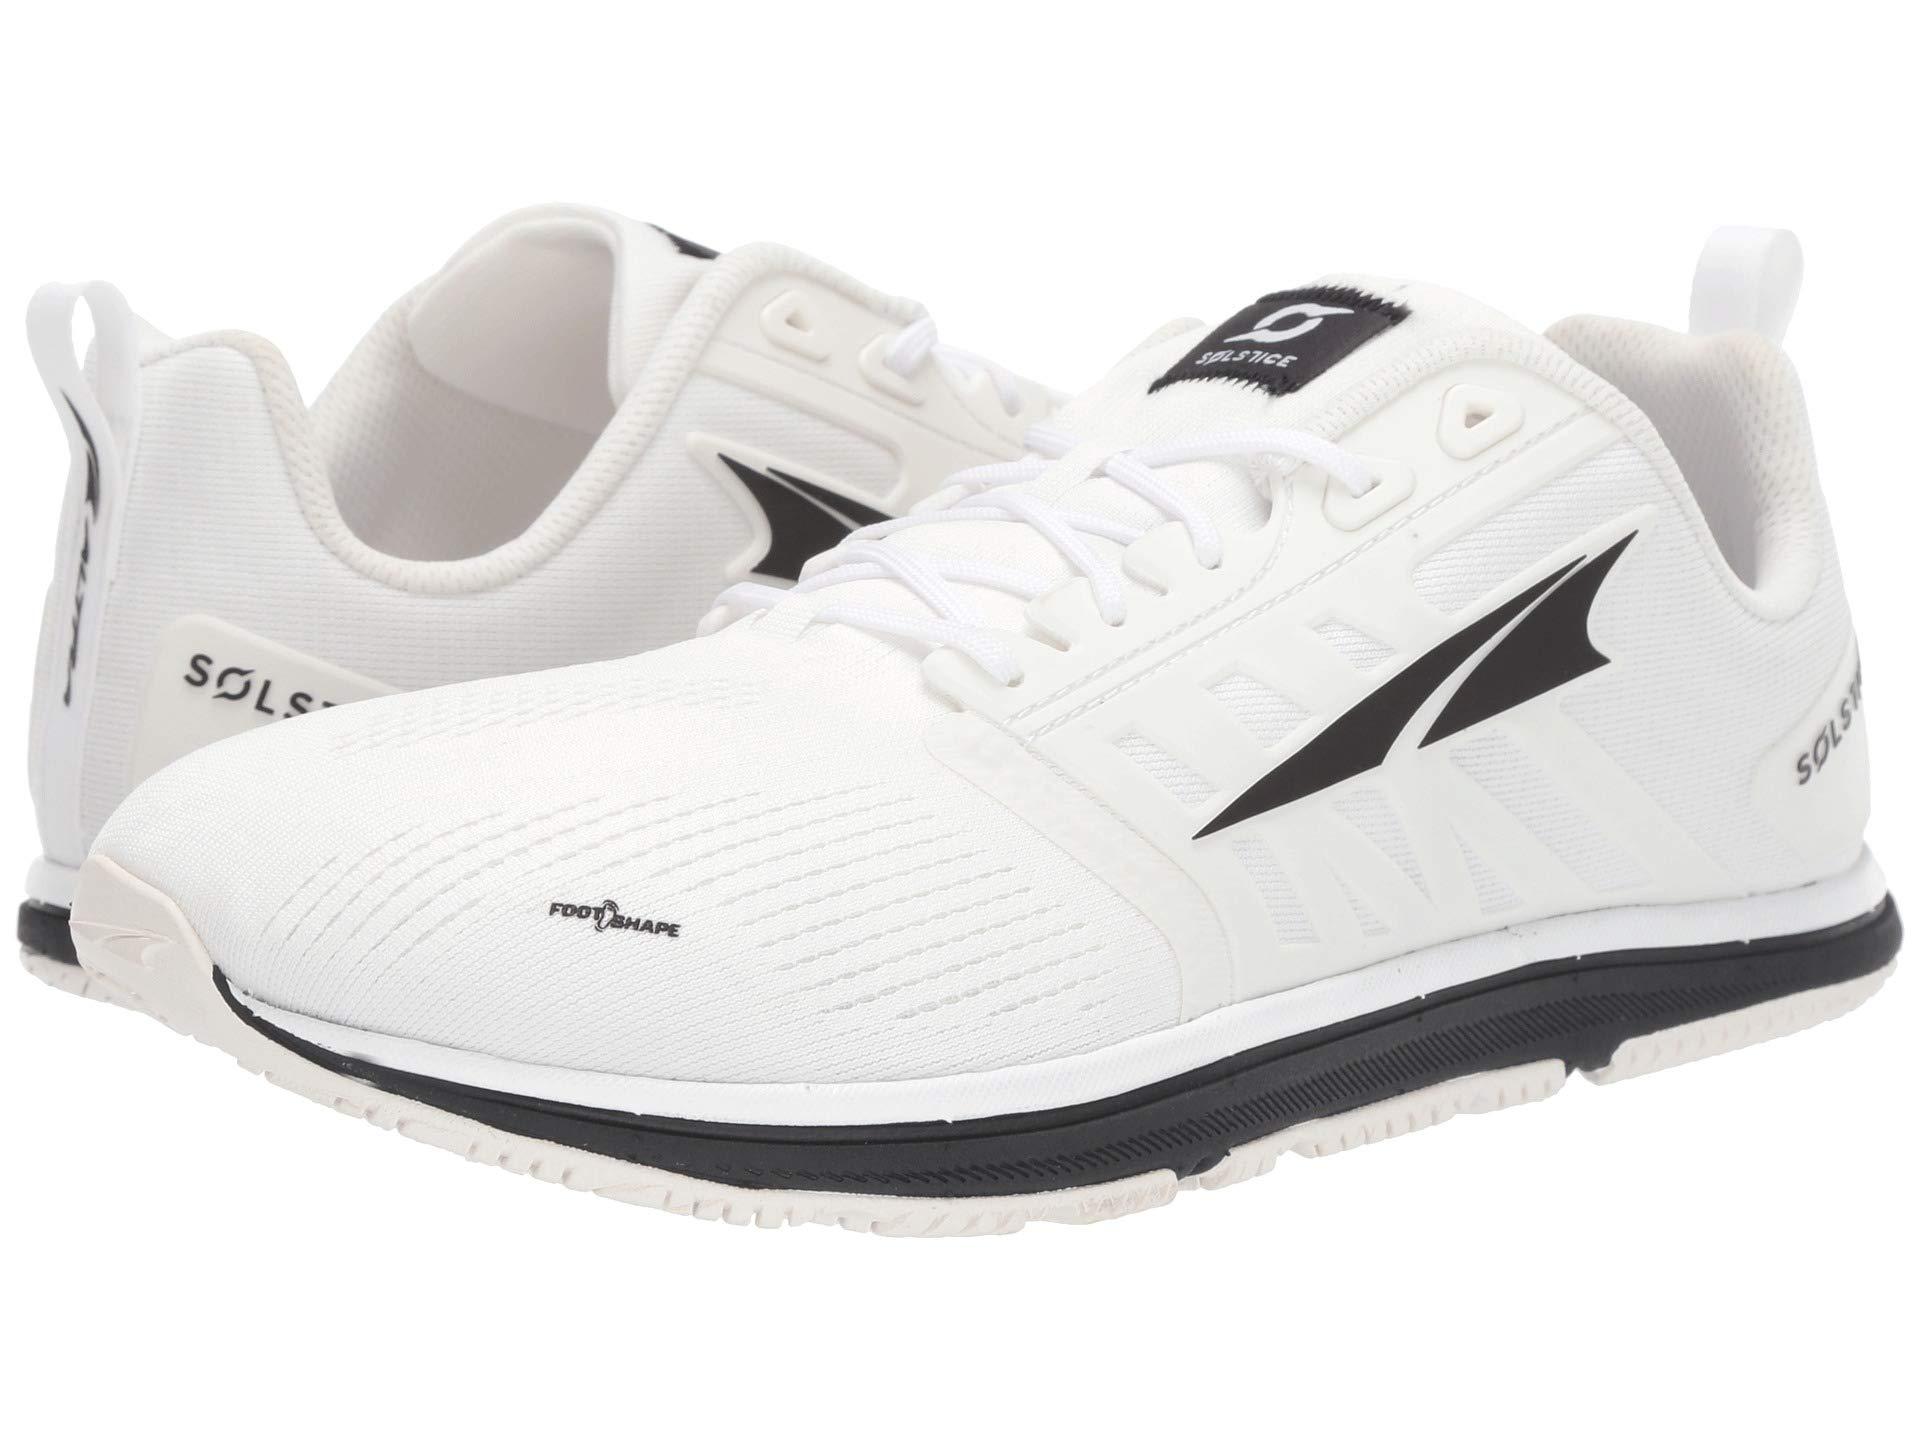 Altra Rubber Solstice Xt in White for Men - Lyst